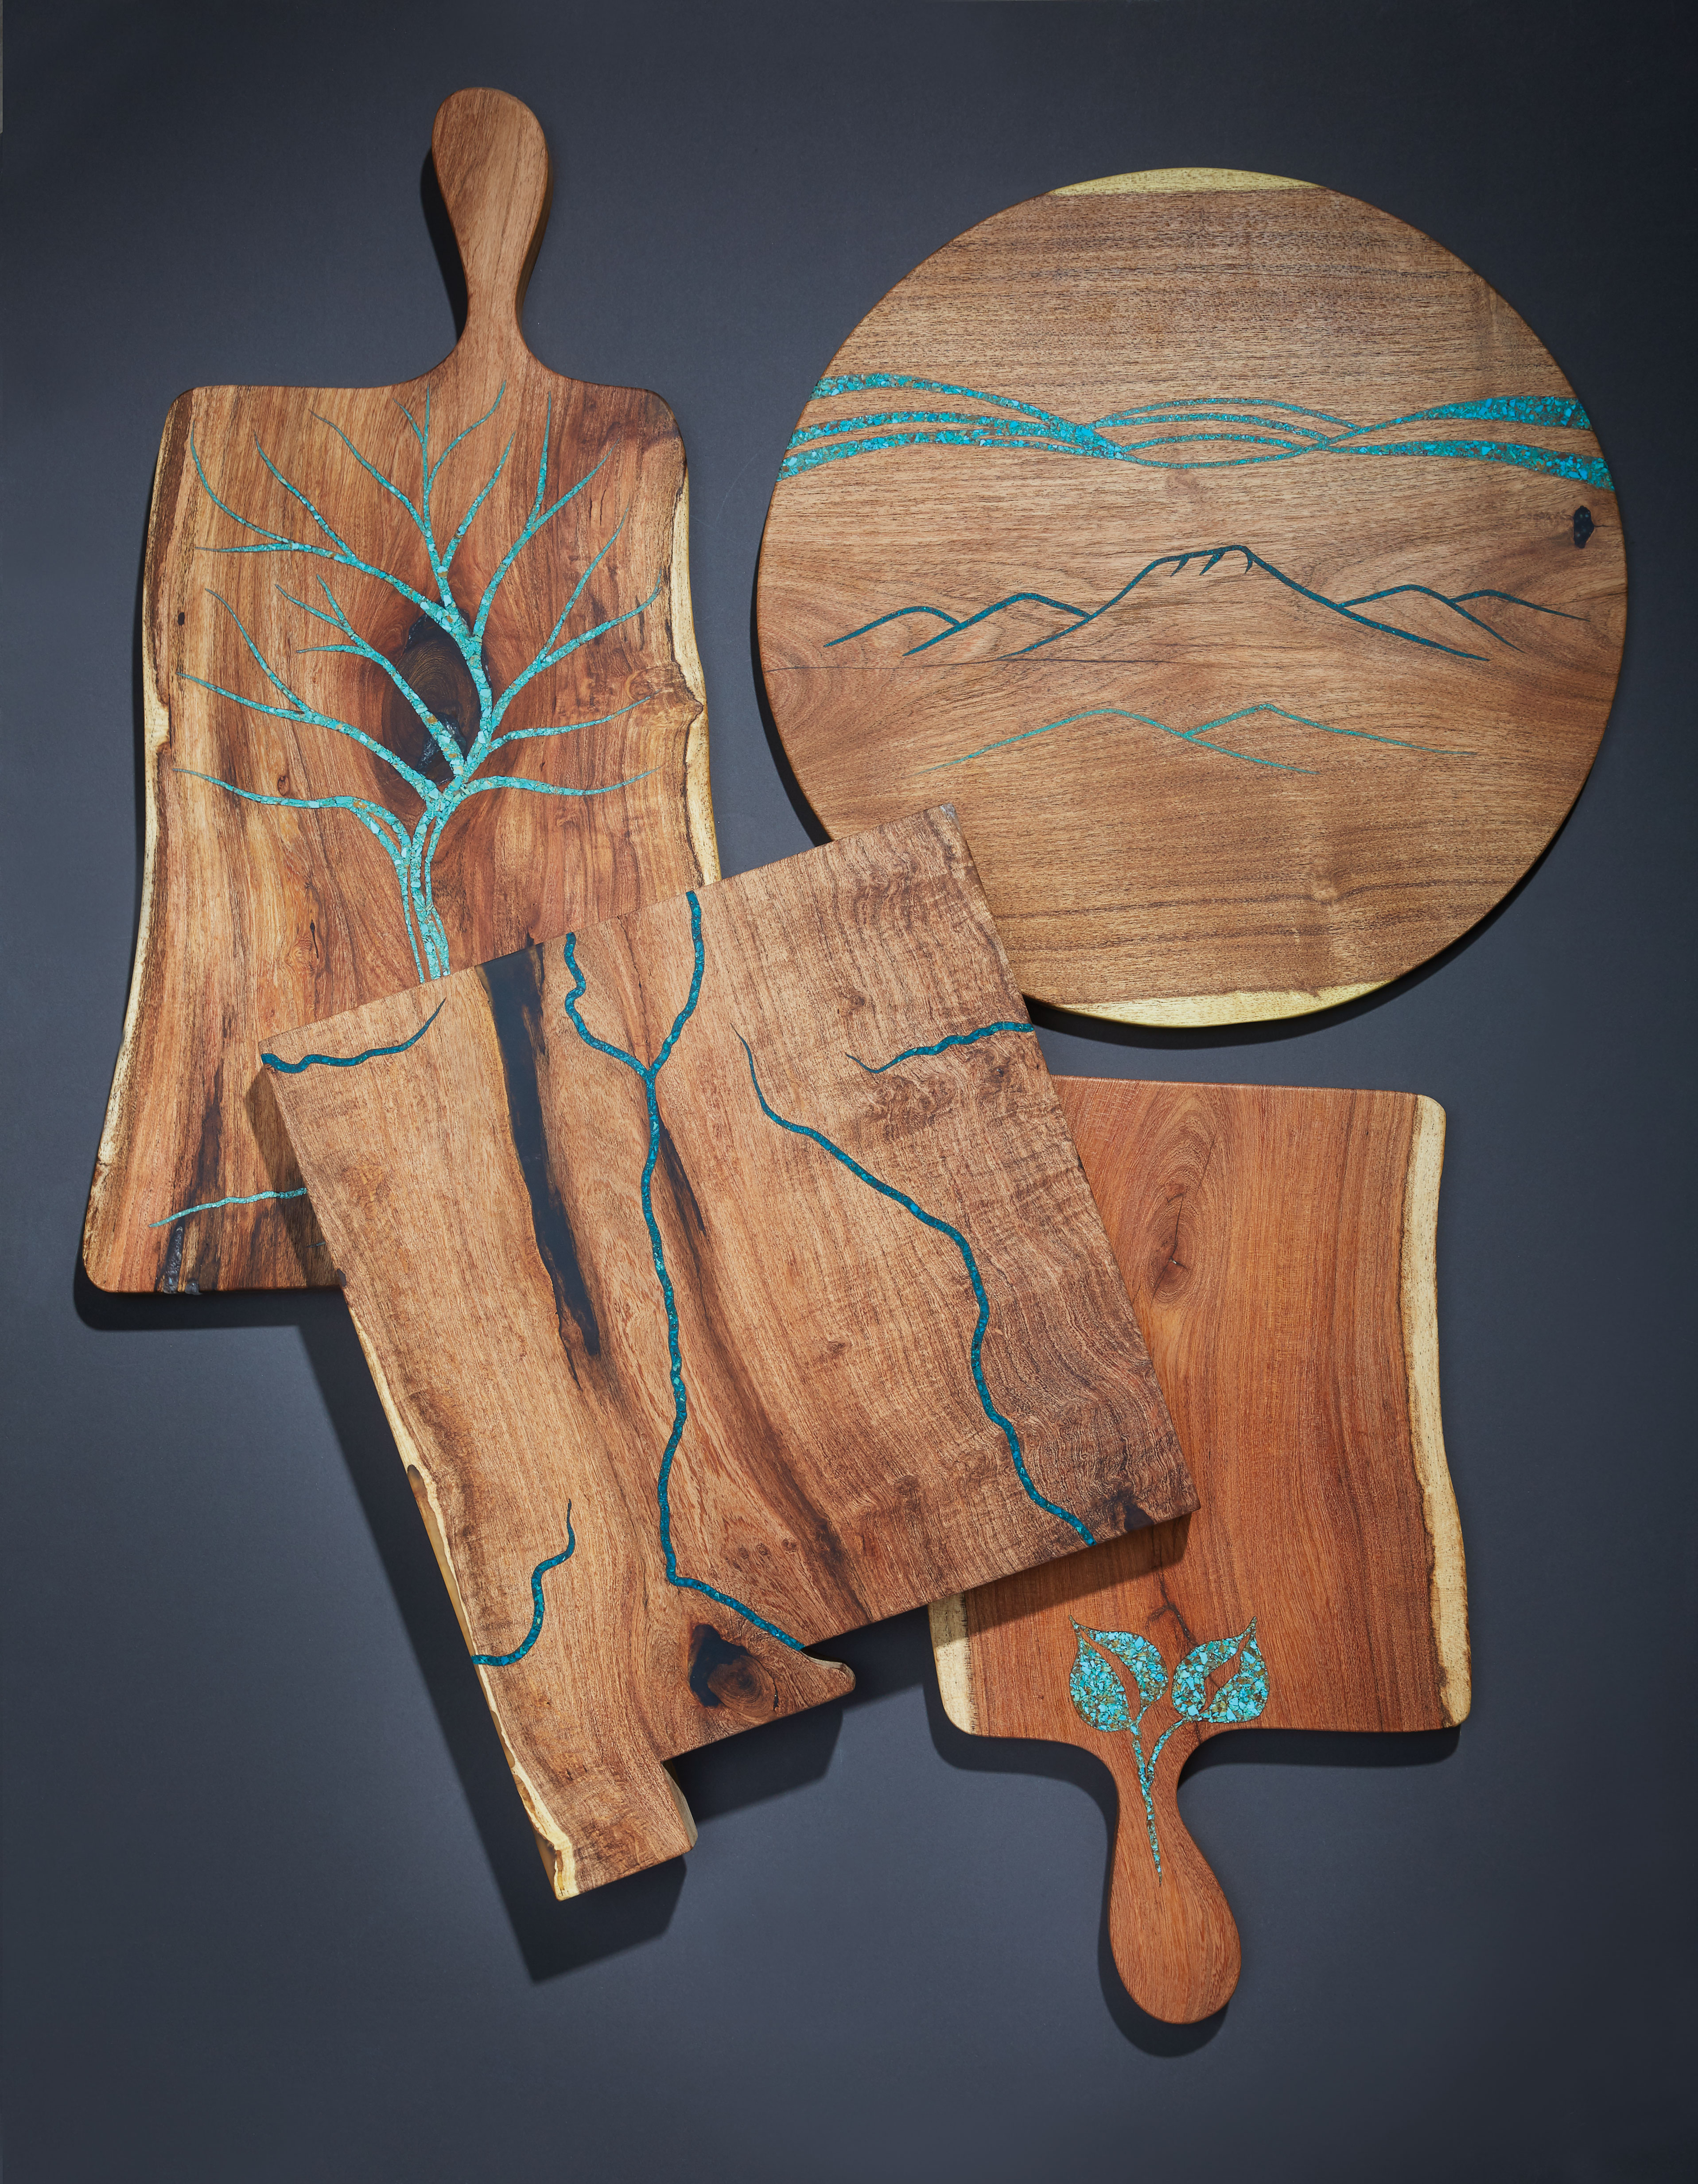 Pieces from Wild Edge Woodworks current collection